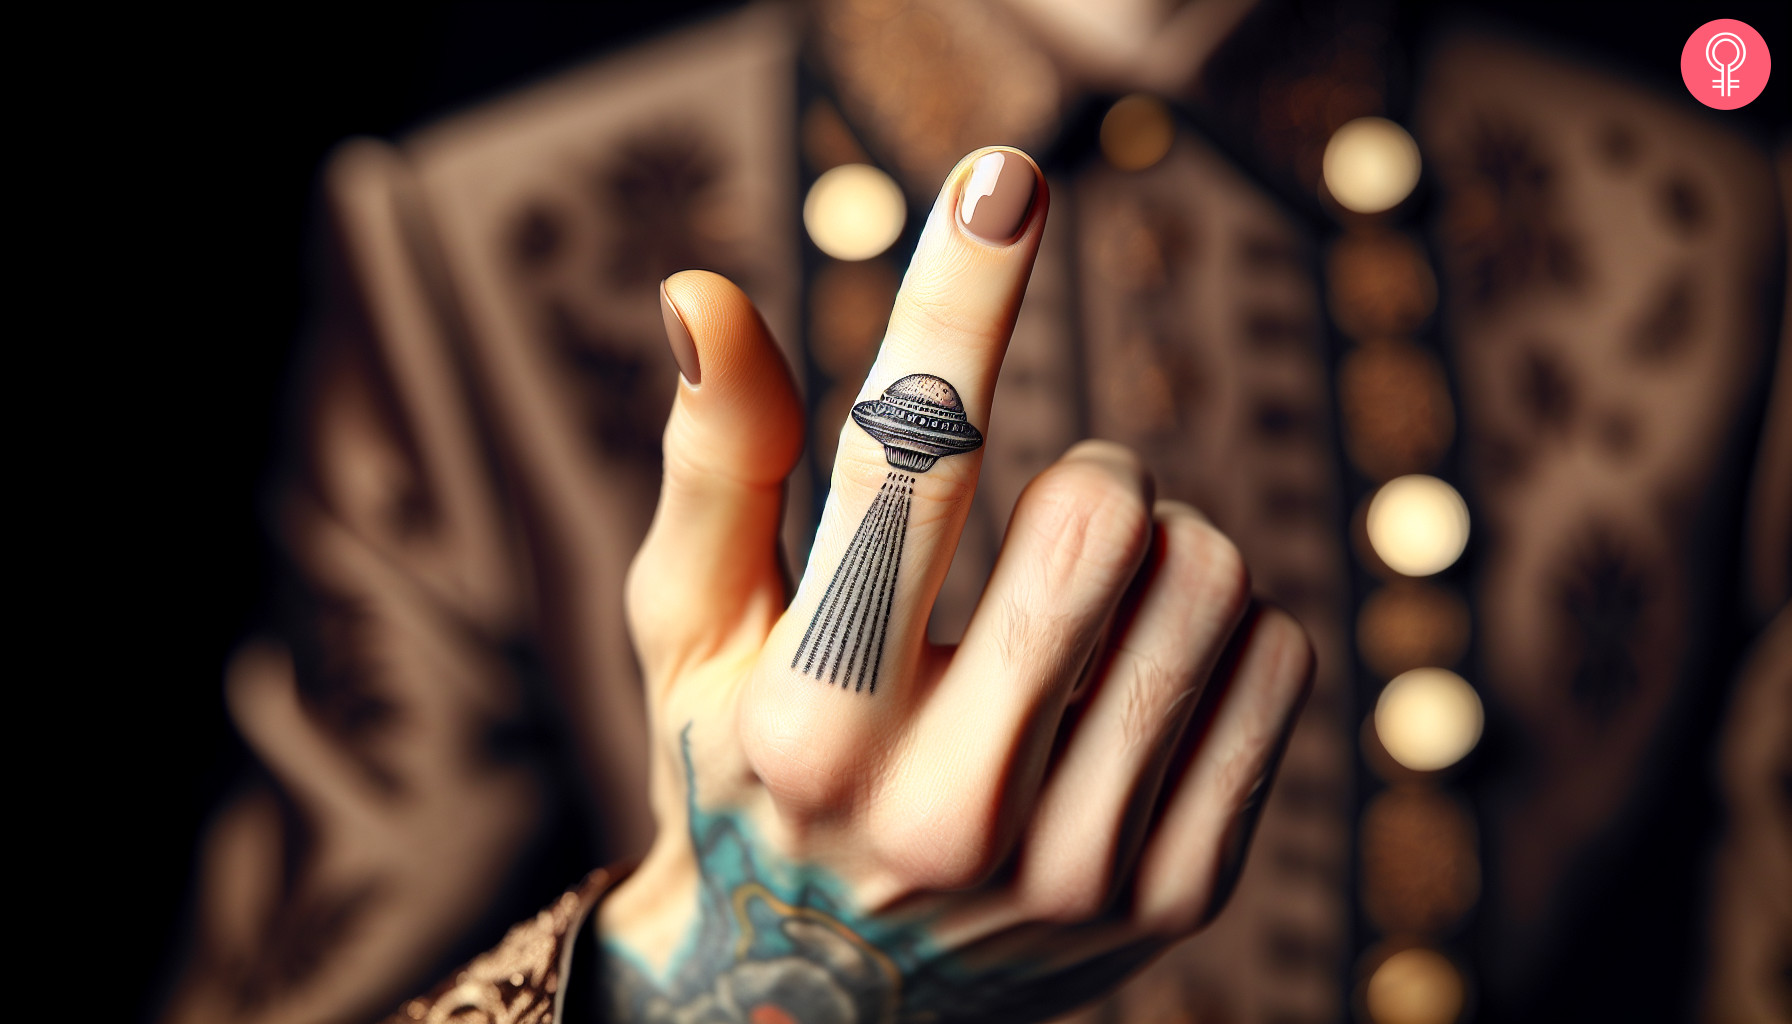 Woman with UFO finger tattoo